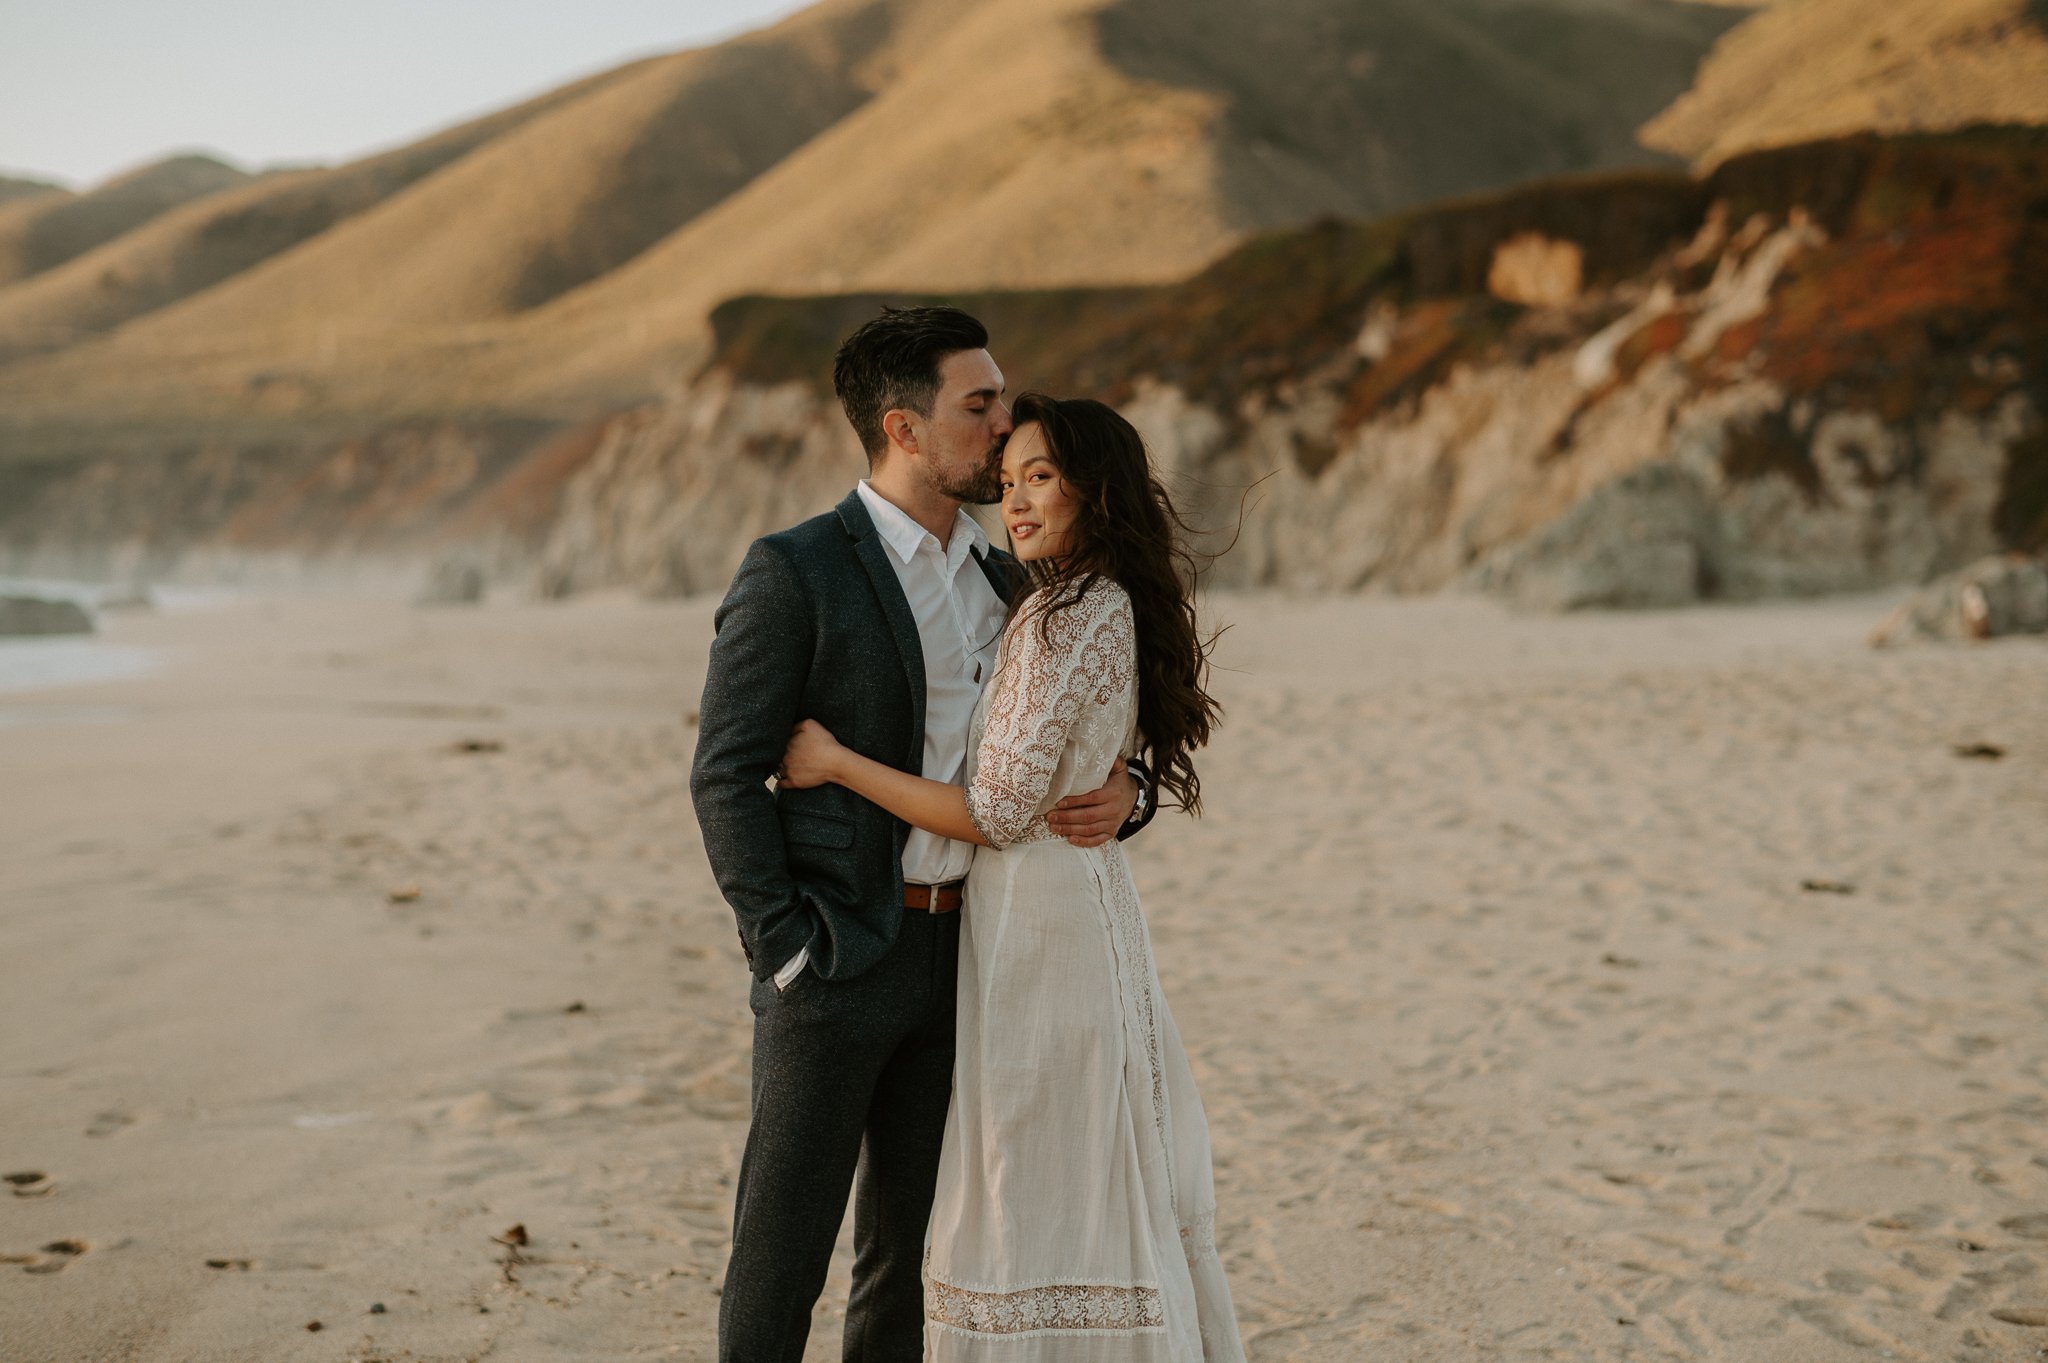 Newly engaged couple hugging on beach Big Sur